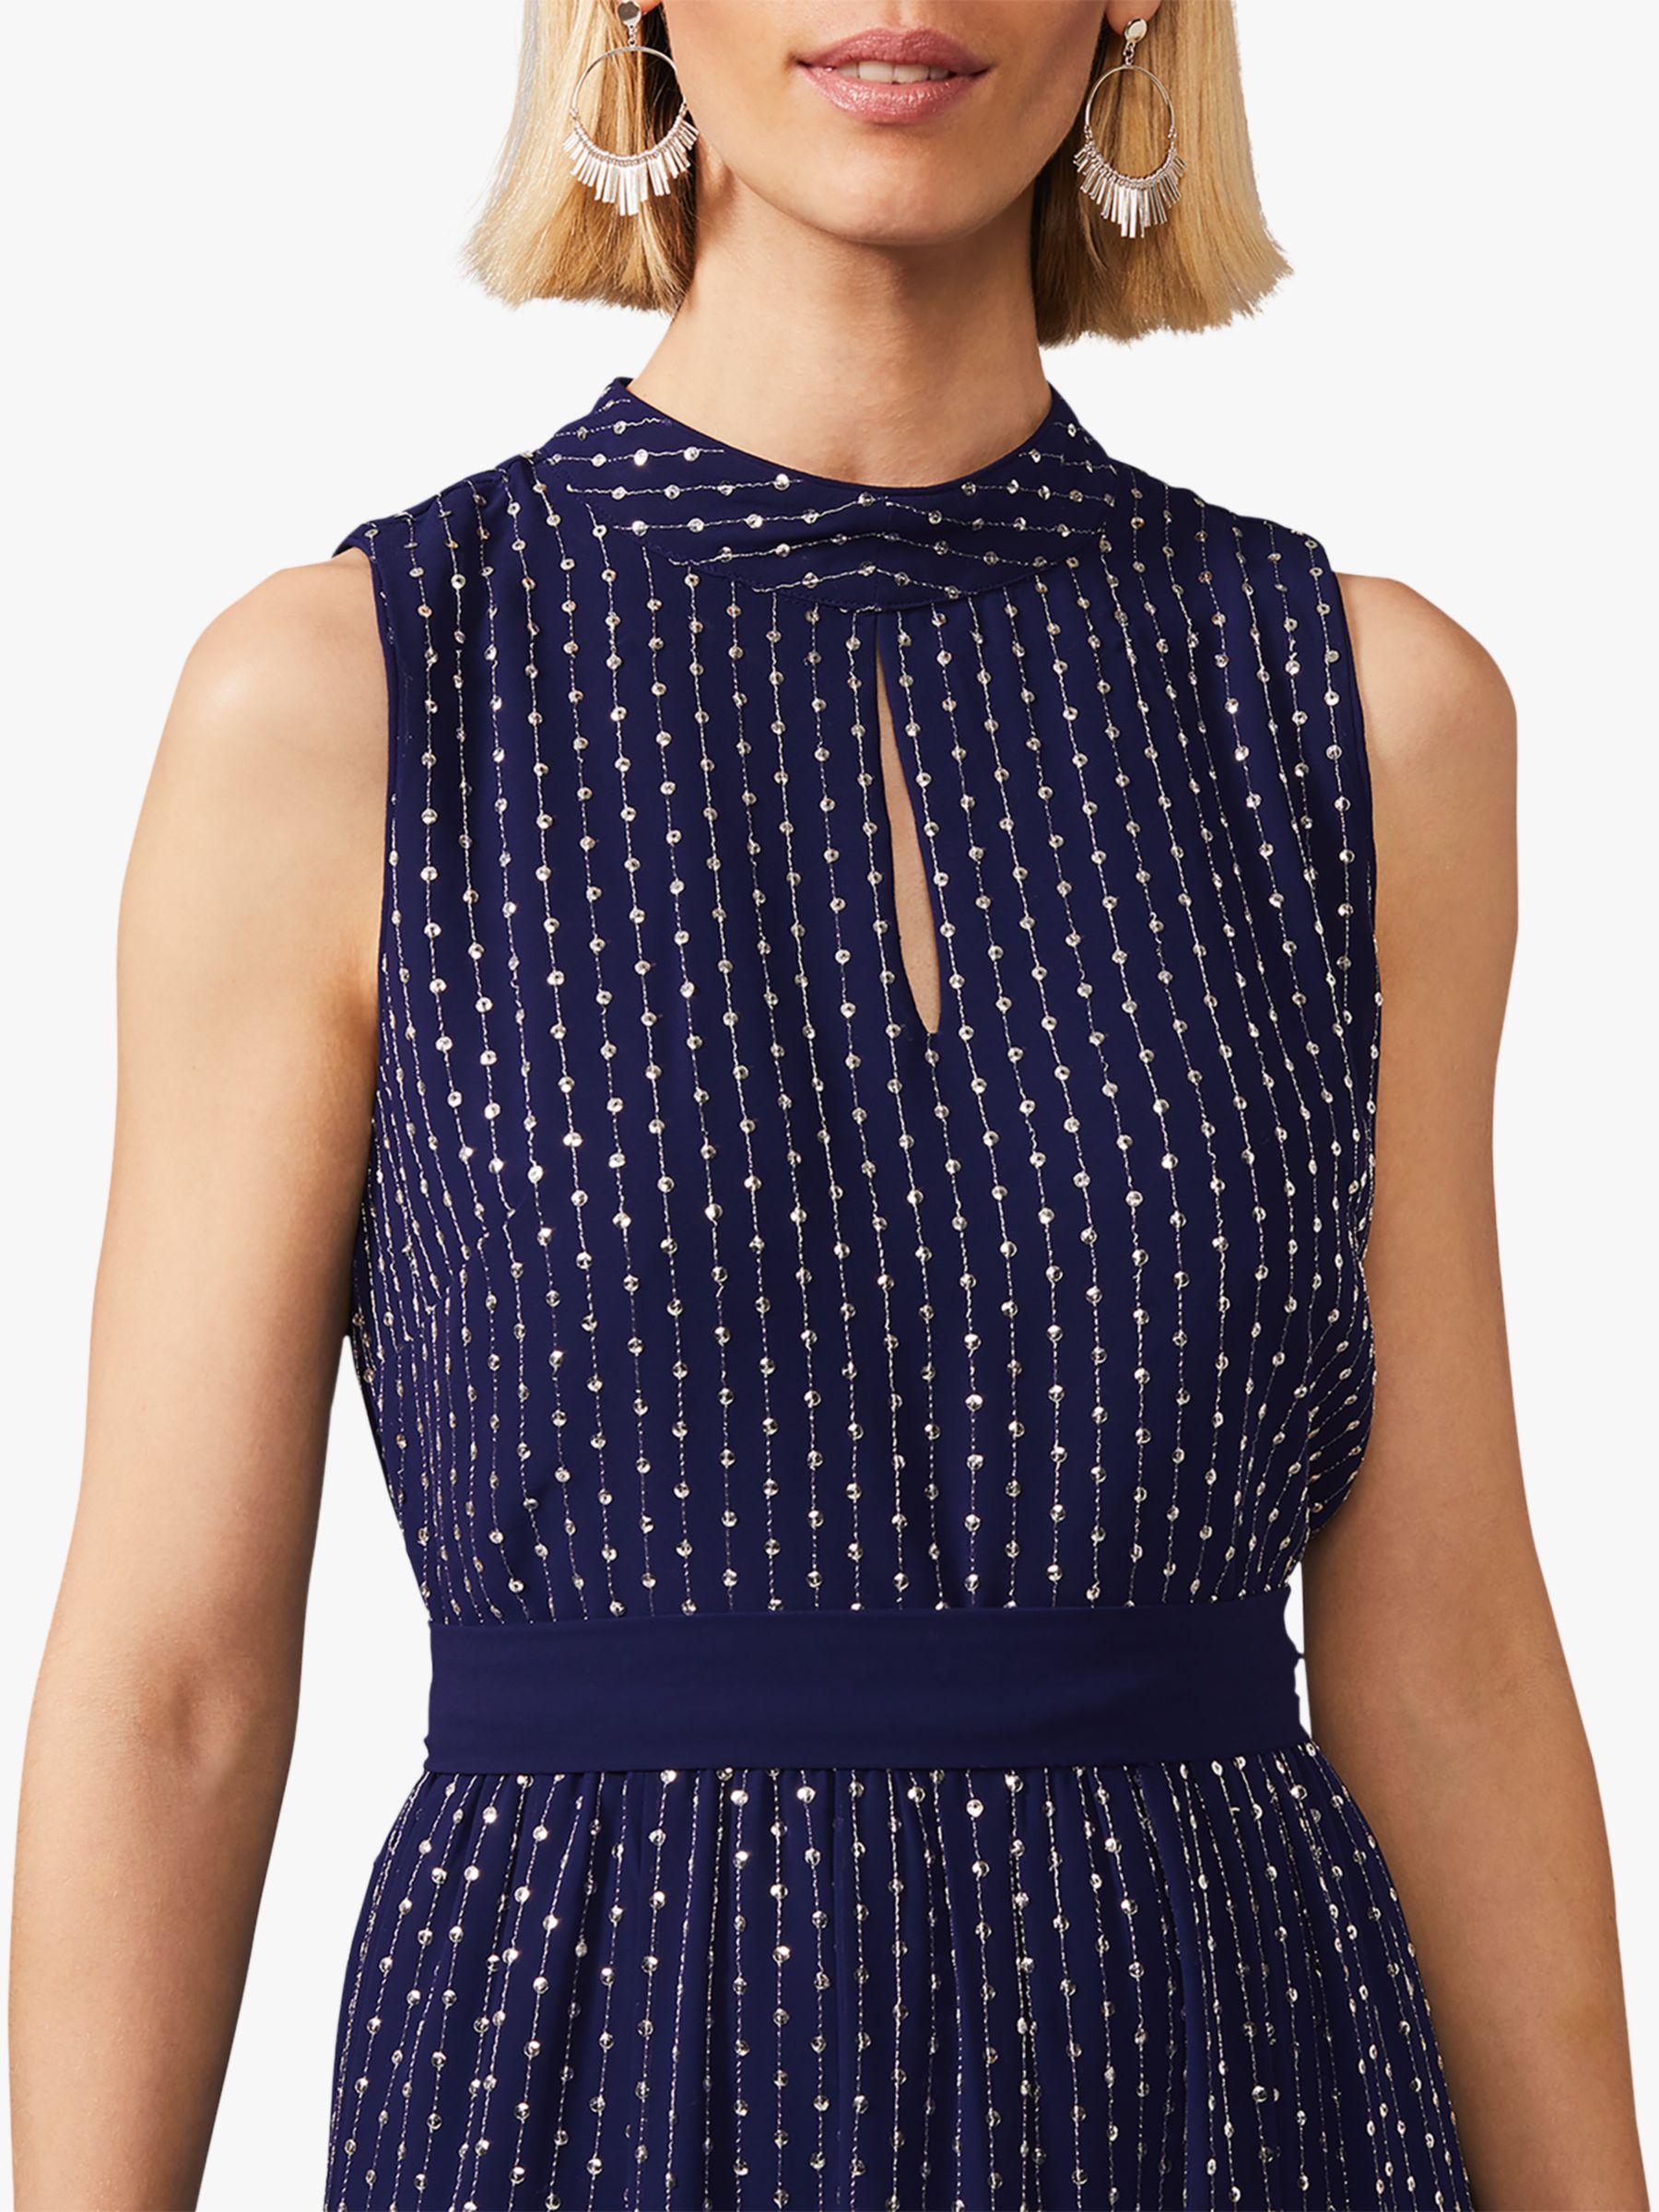 Buy Phase Eight Collection 8 Pippa Spot Print Blouson Maxi Dress, Cobalt Online at johnlewis.com